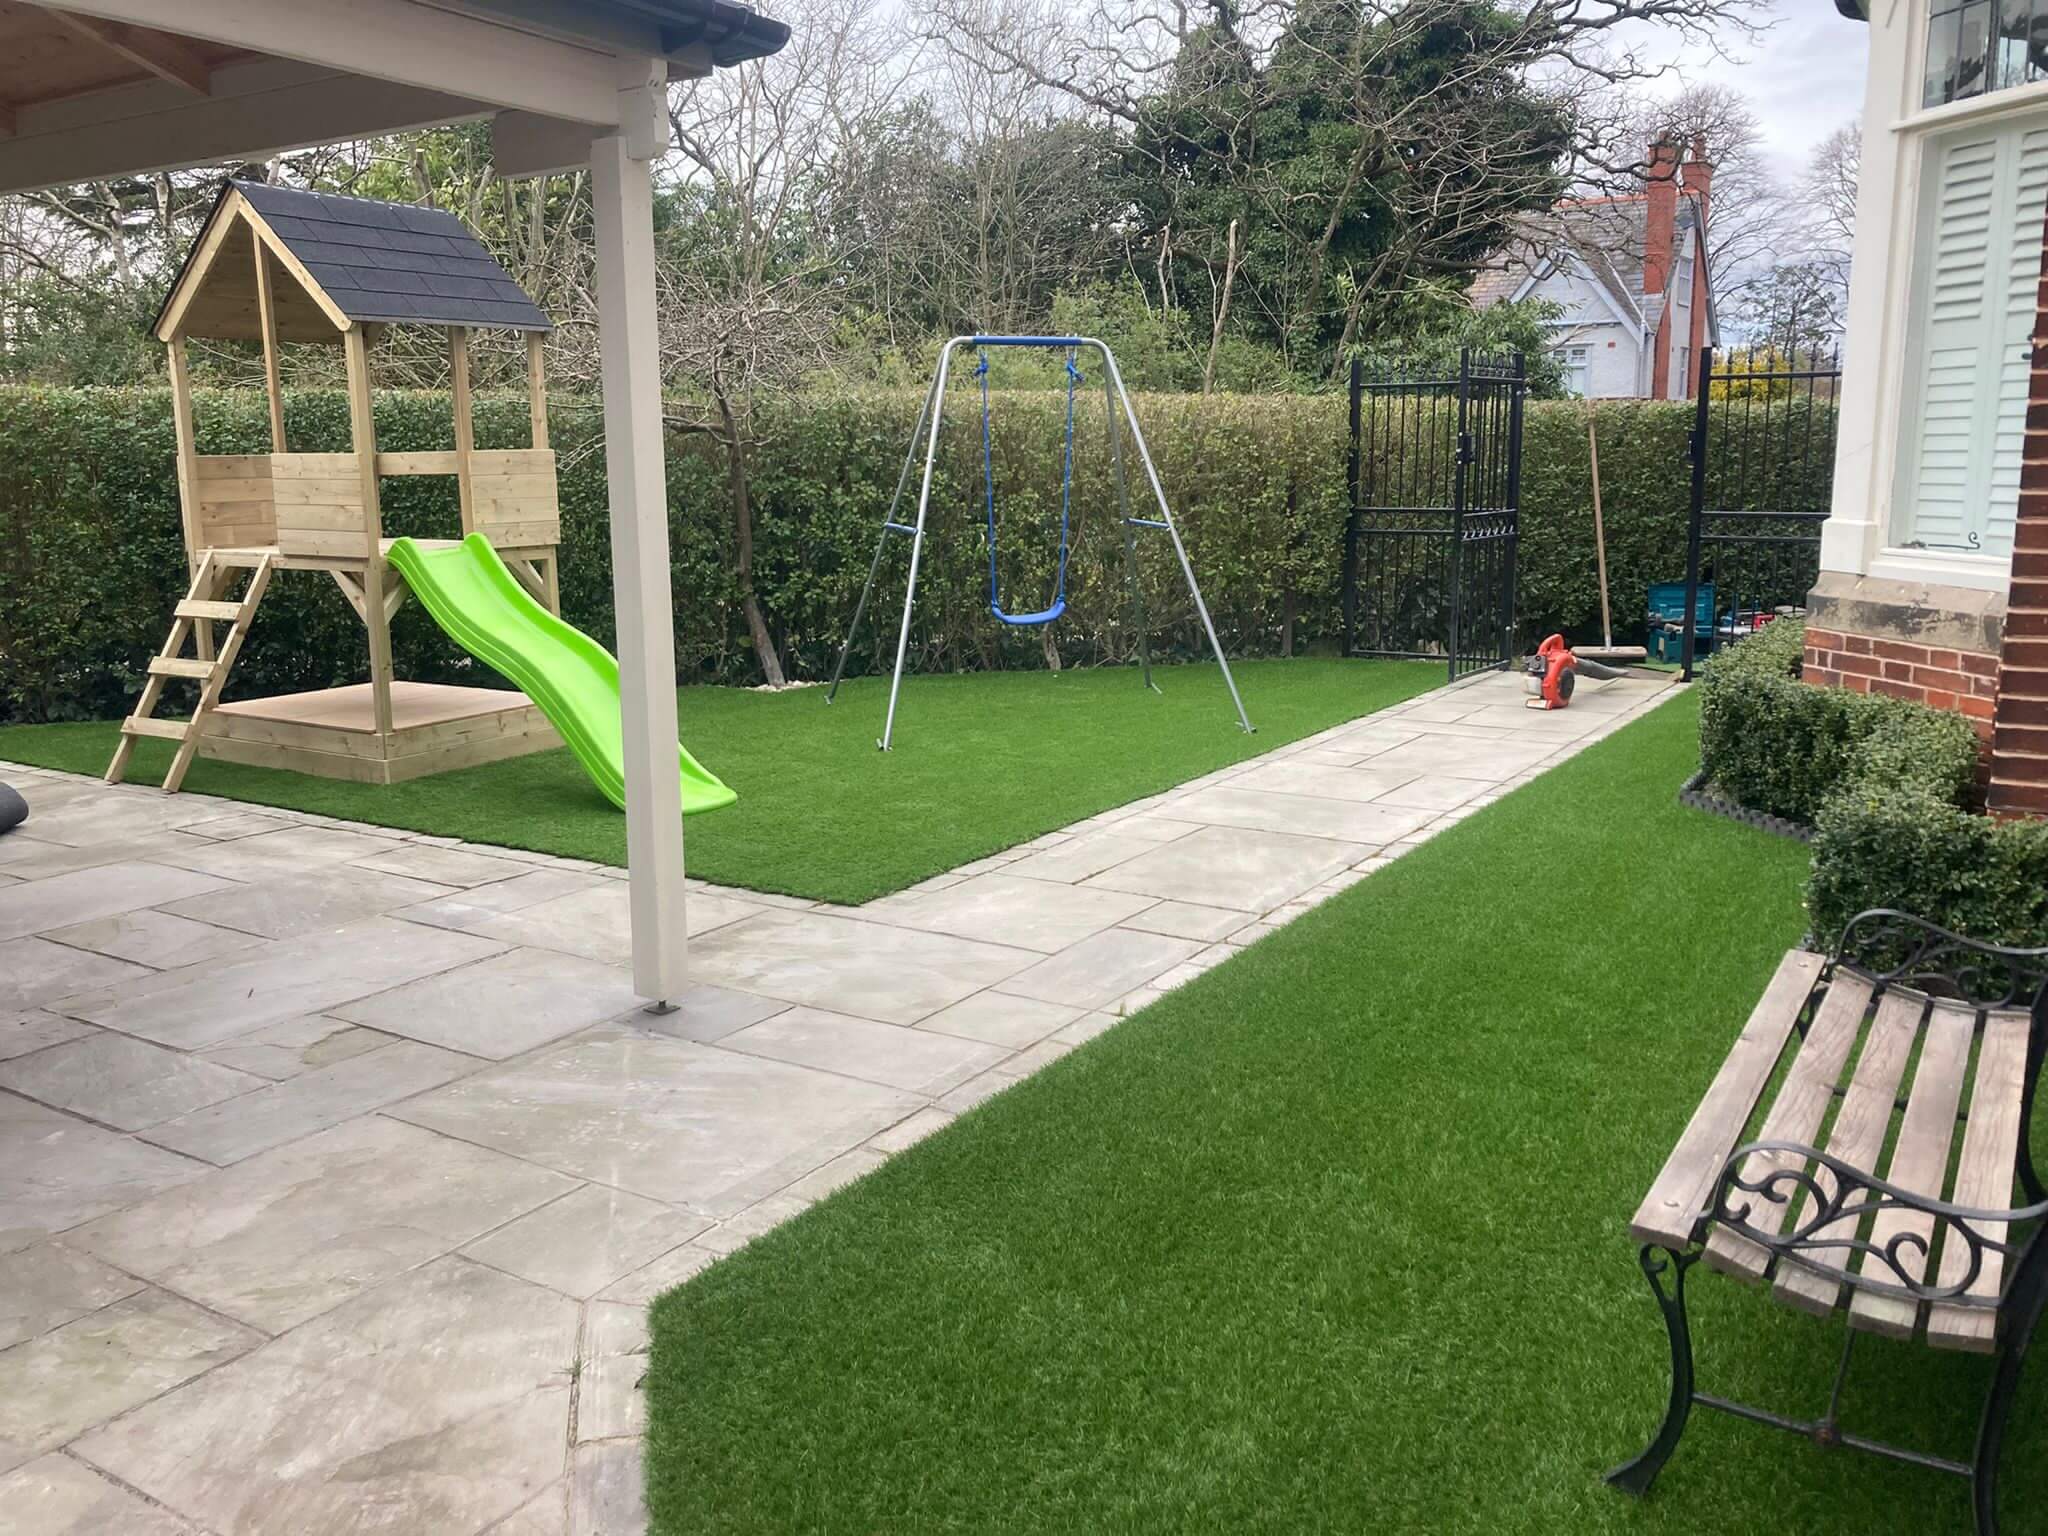 Photo of a garden with artificial grass and kids play equipment